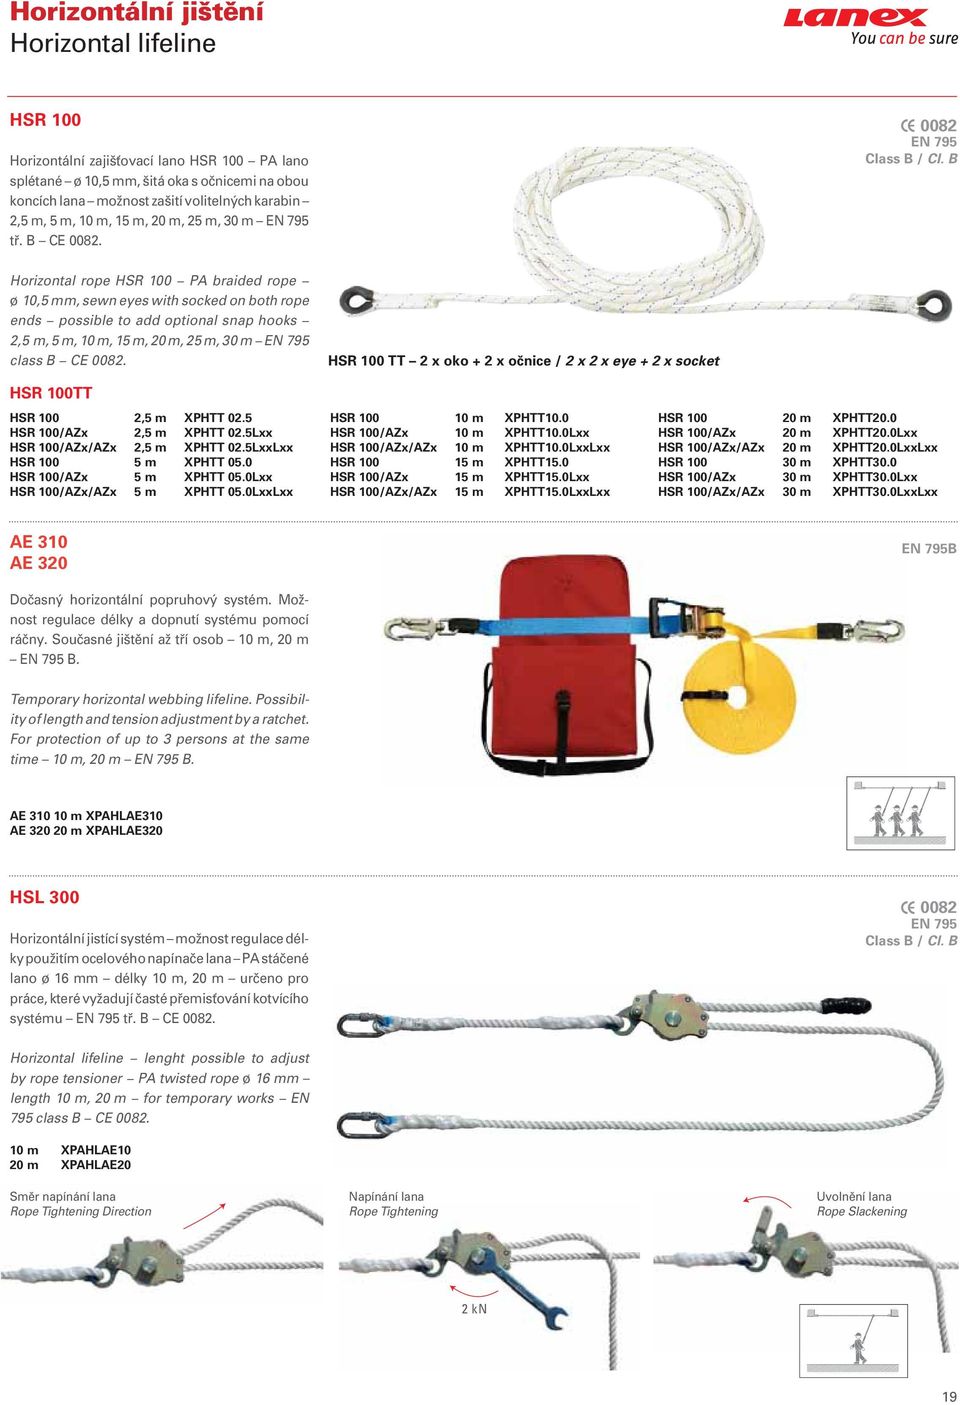 B Horizontal rope HSR 100 PA braided rope ø 10,5 mm, sewn eyes with socked on both rope ends possible to add optional snap hooks 2,5 m, 5 m, 10 m, 15 m, 20 m, 25 m, 30 m EN 795 class B CE.